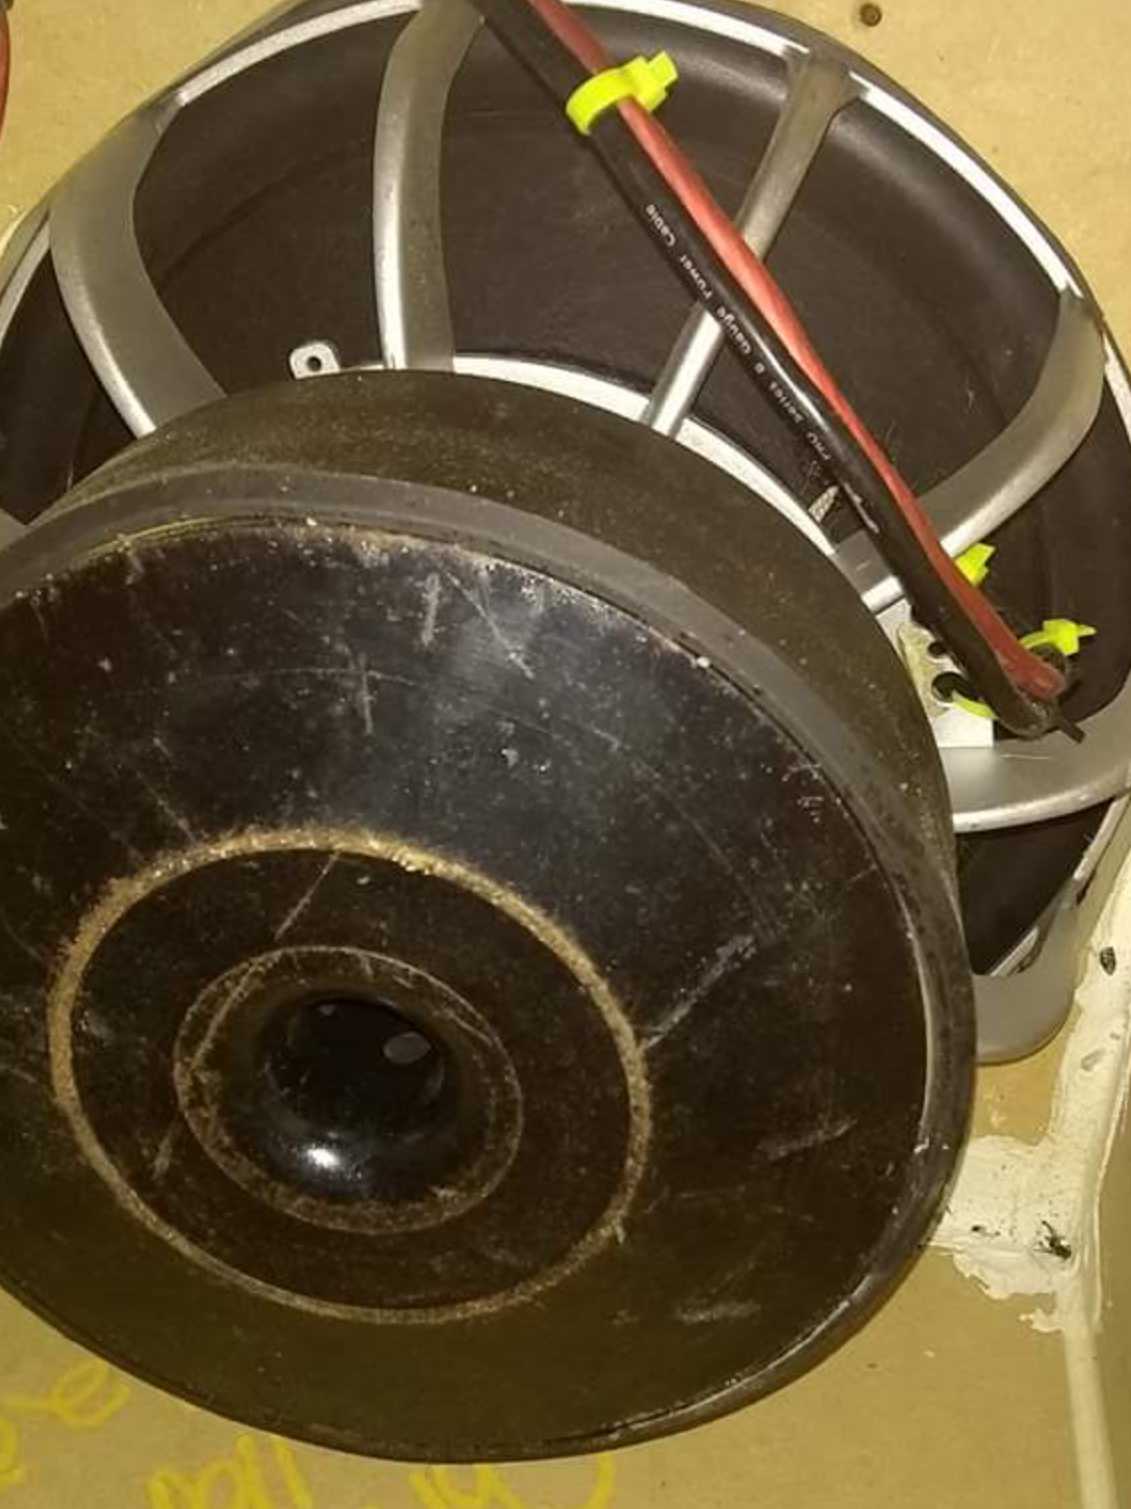 More information about "Help me identify this subwoofer please! pics in post."